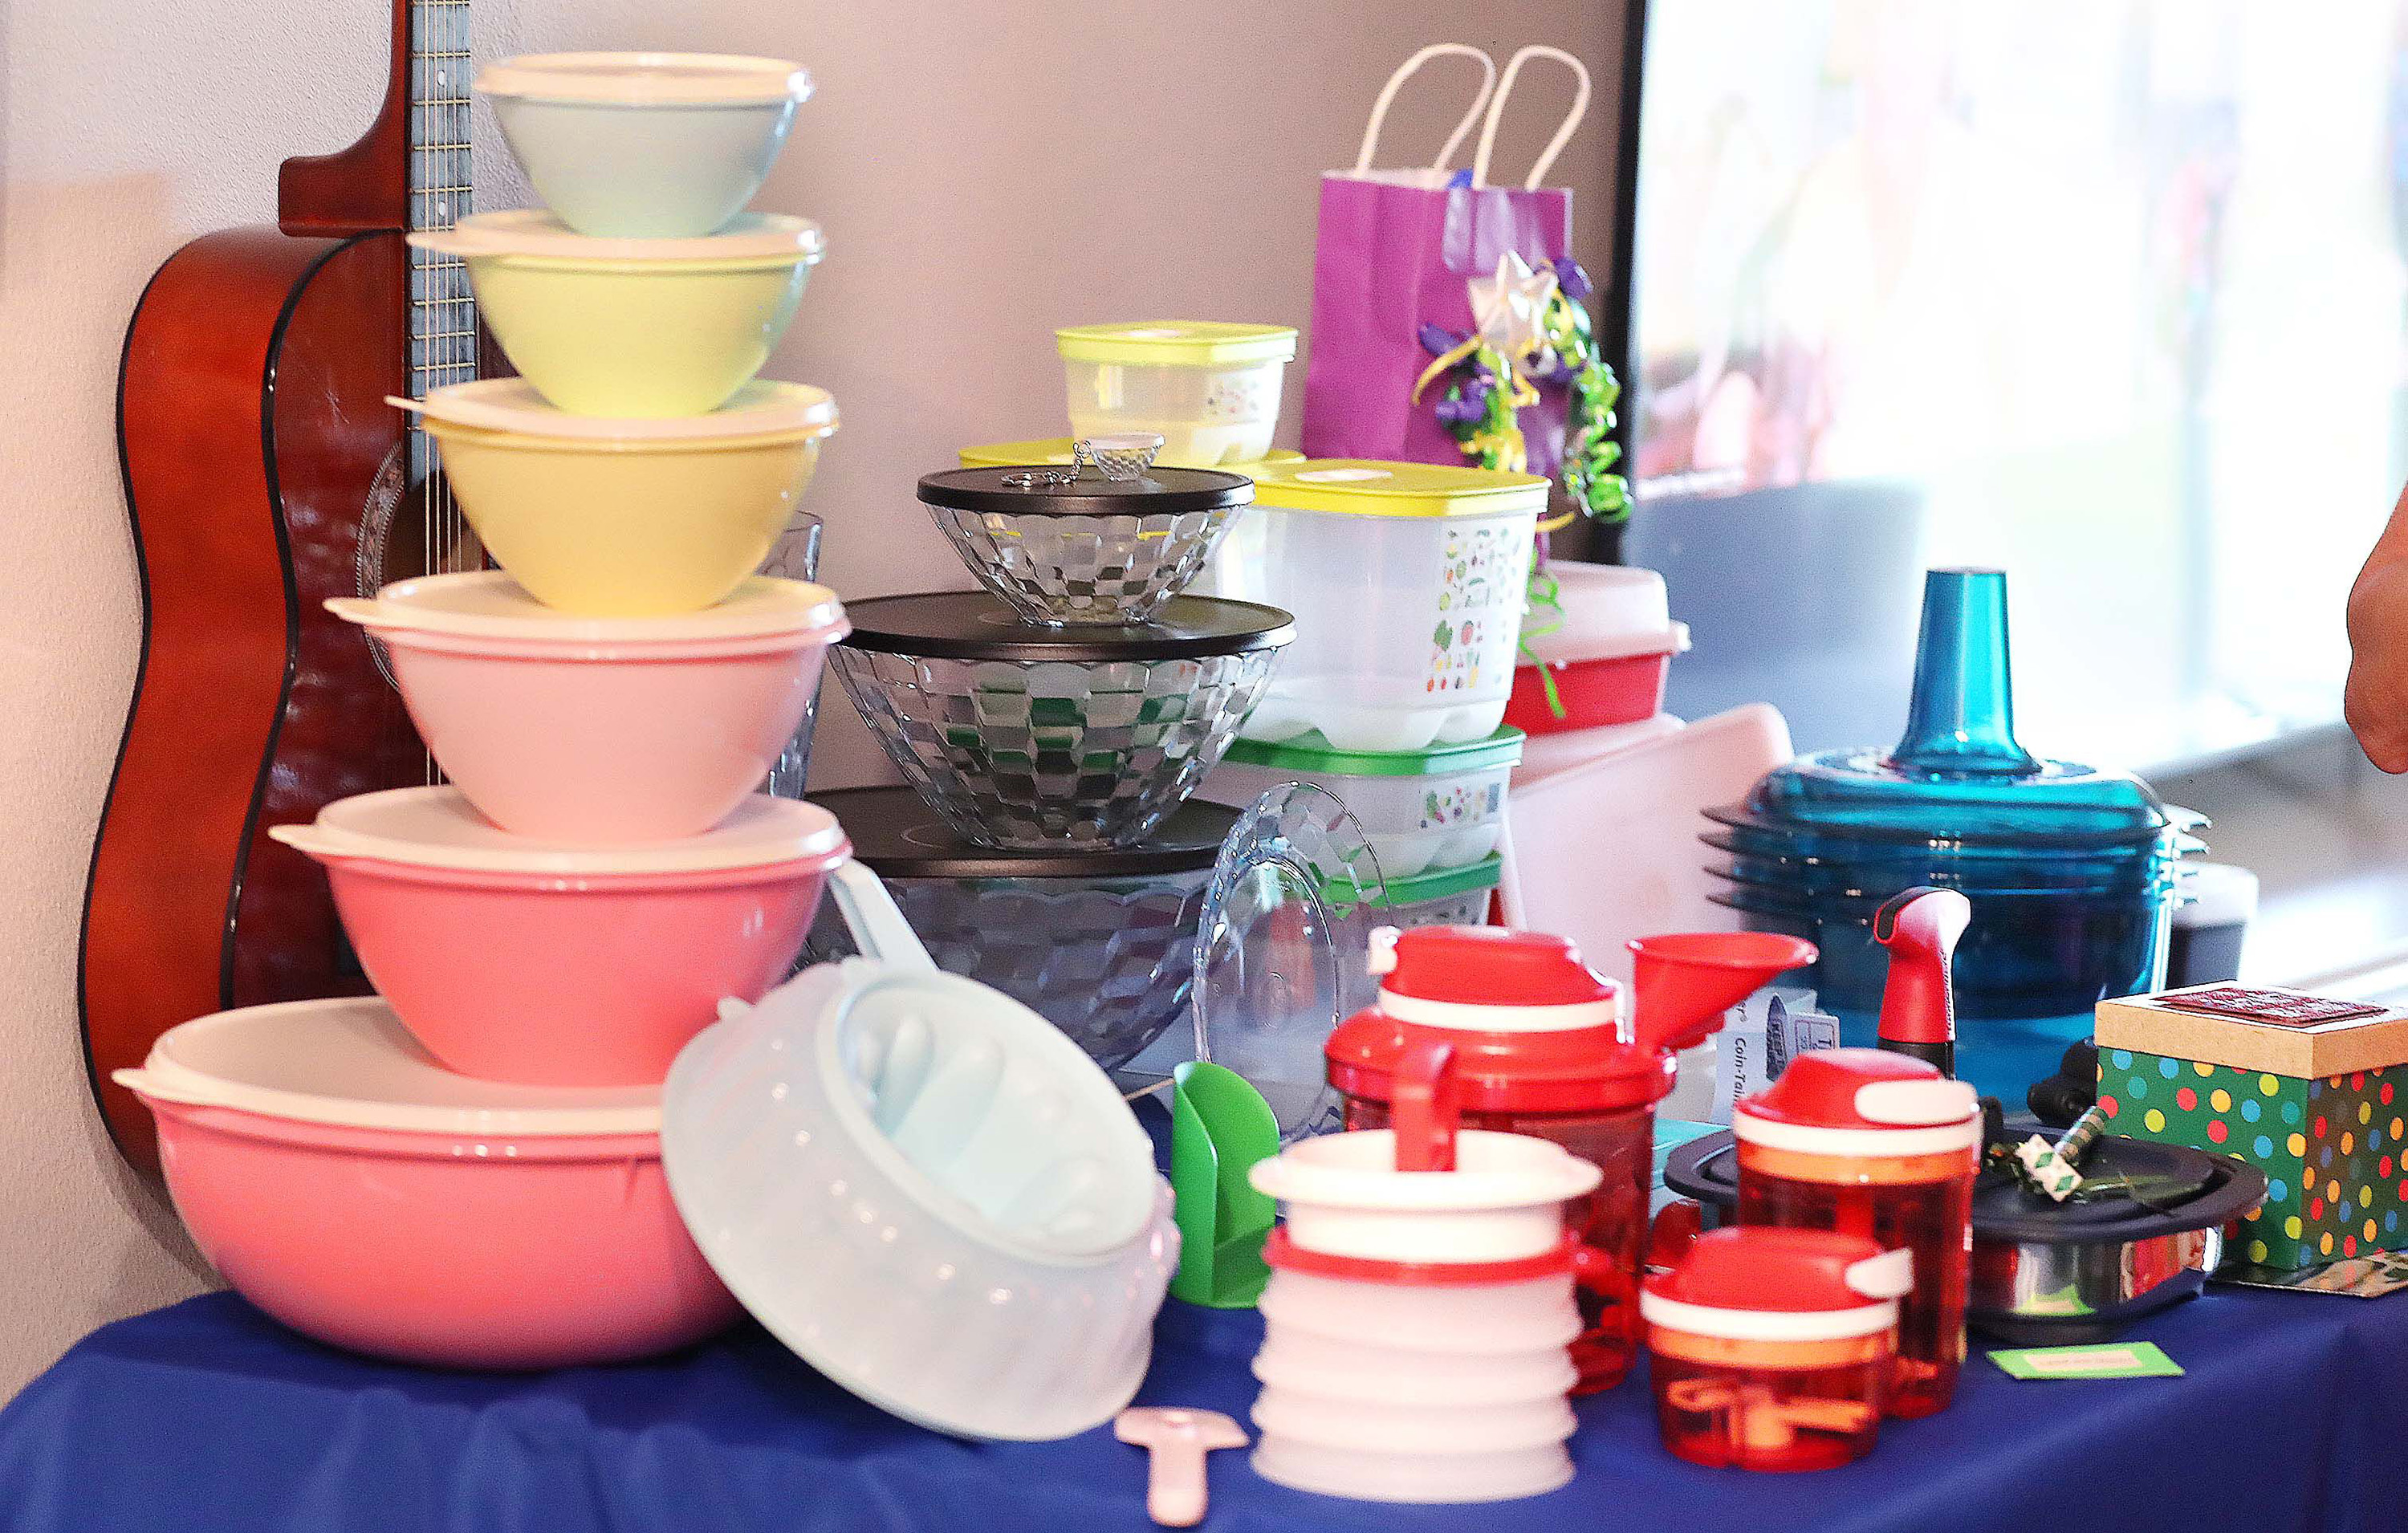 Korinne's Tupperware Party - The biggest Impressions bowl is not